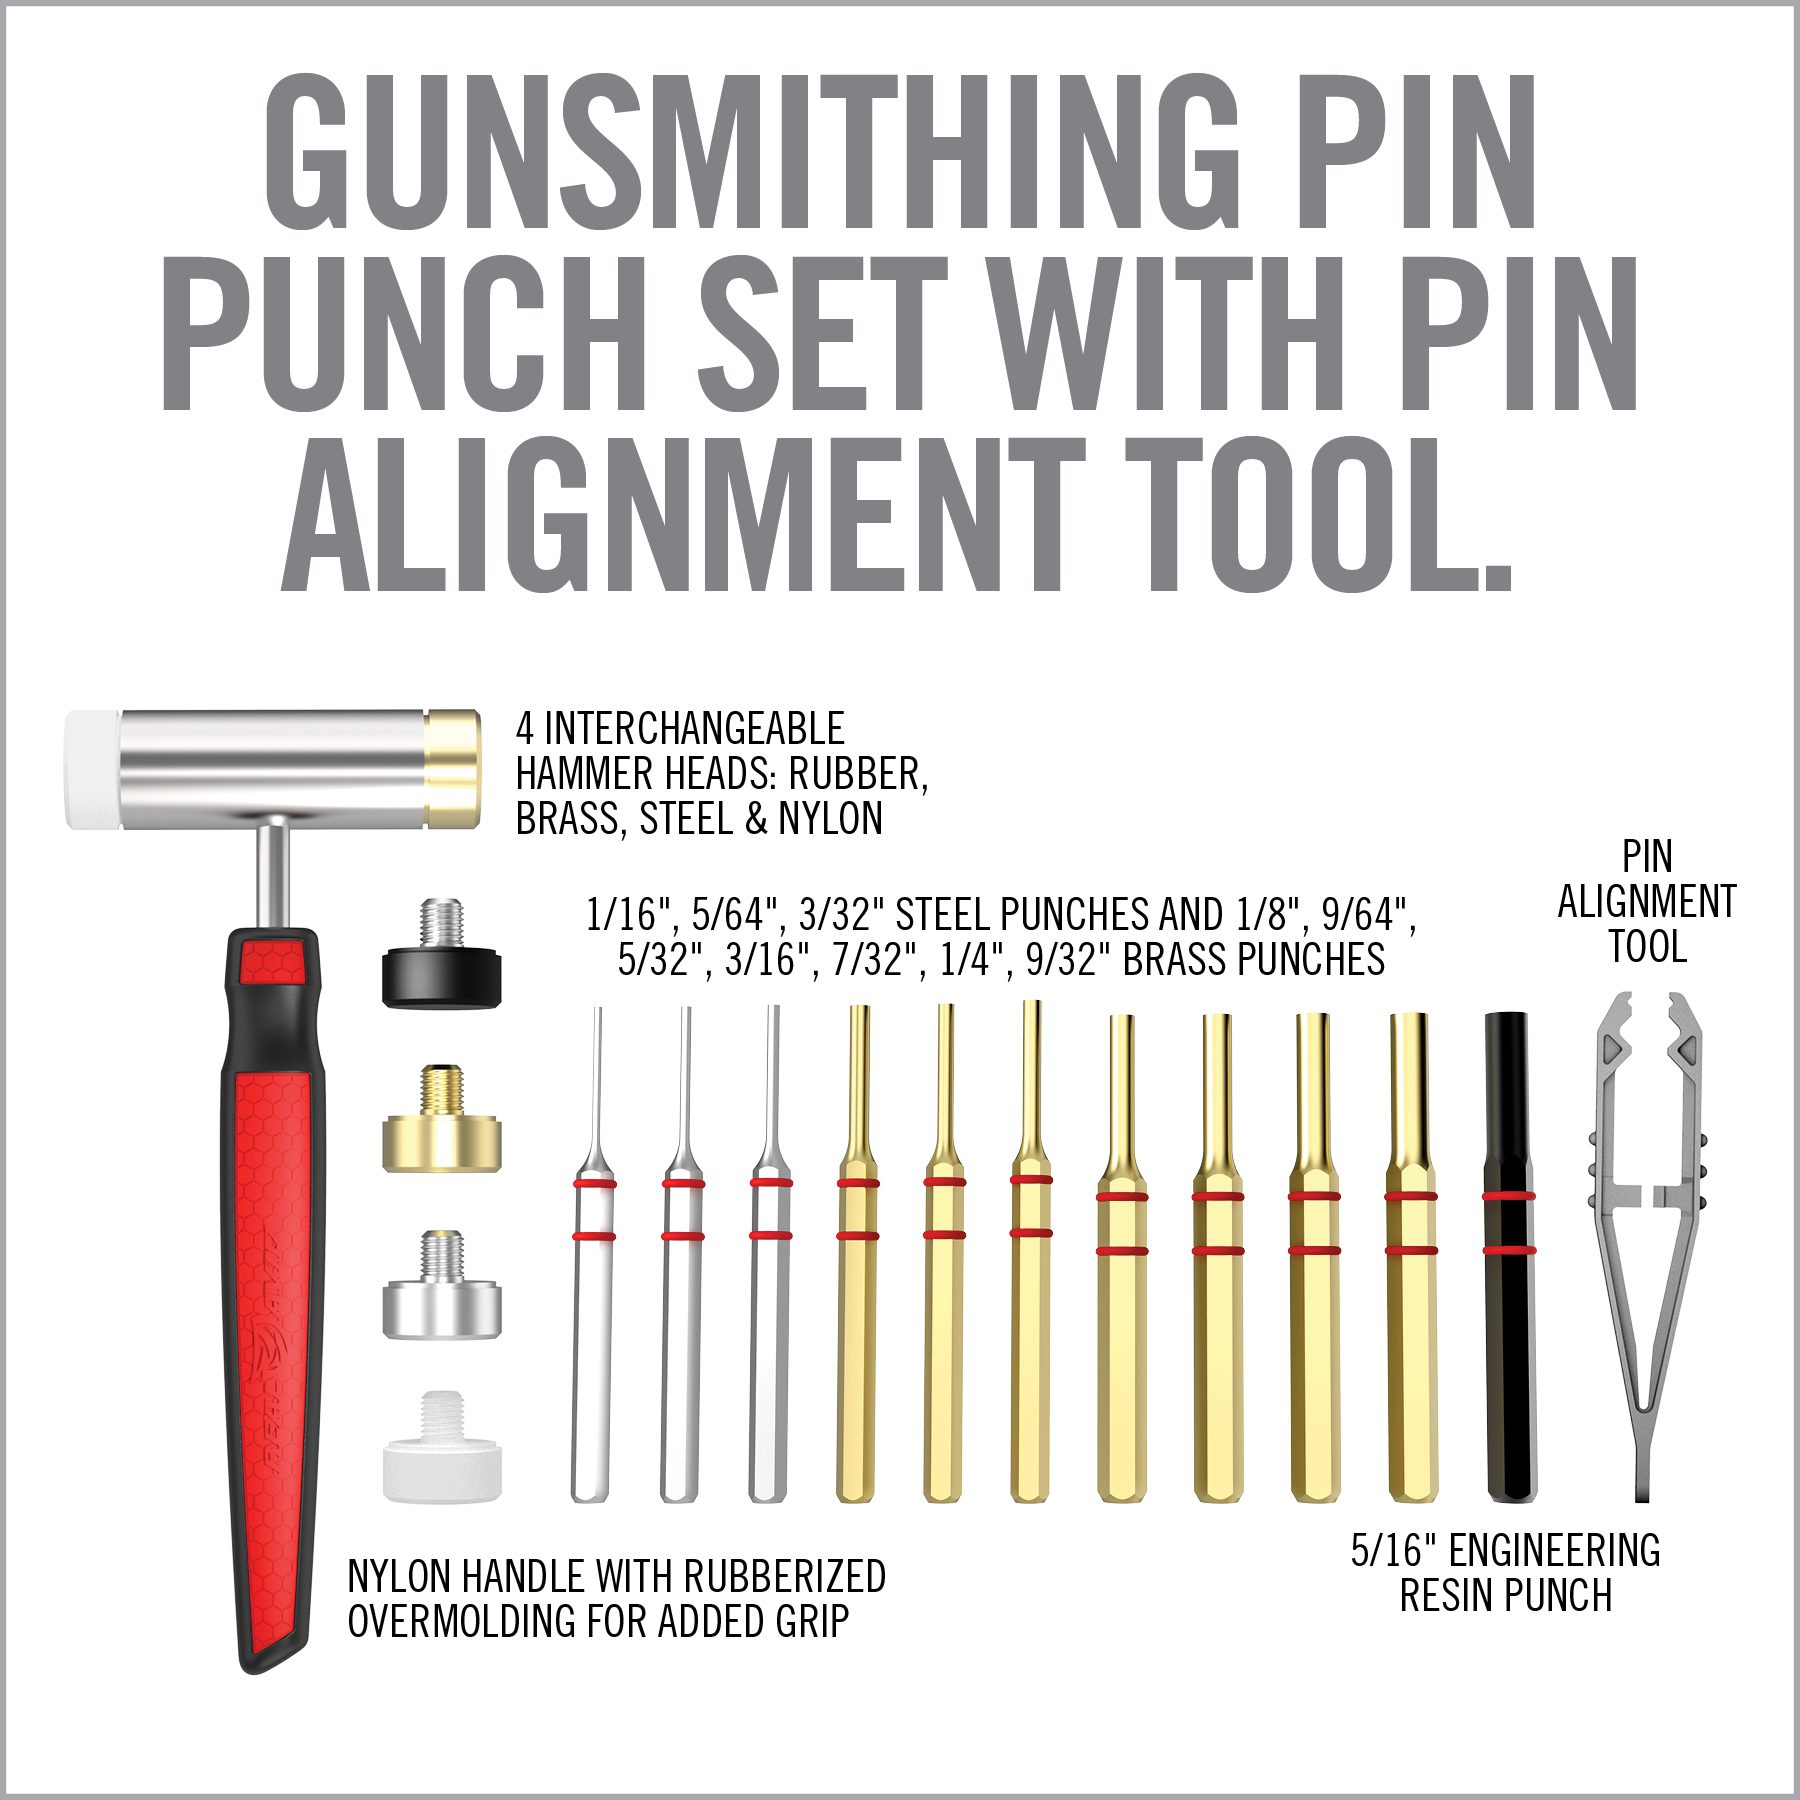 a poster describing how to use the gun punch set with pin alignment tool